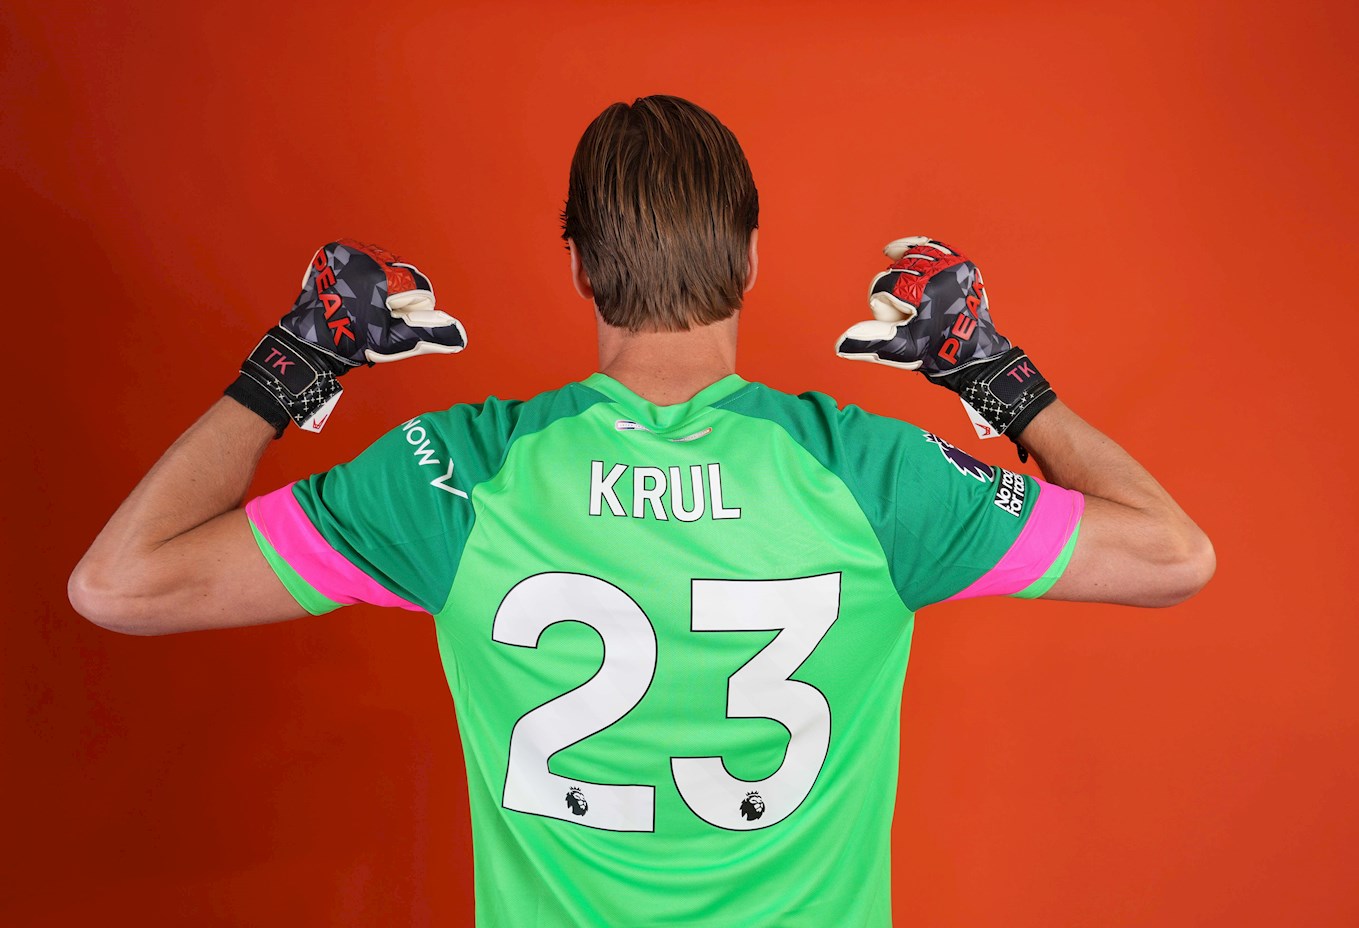 Tim Krul shows off his new number 23 shirt after signing for the Hatters